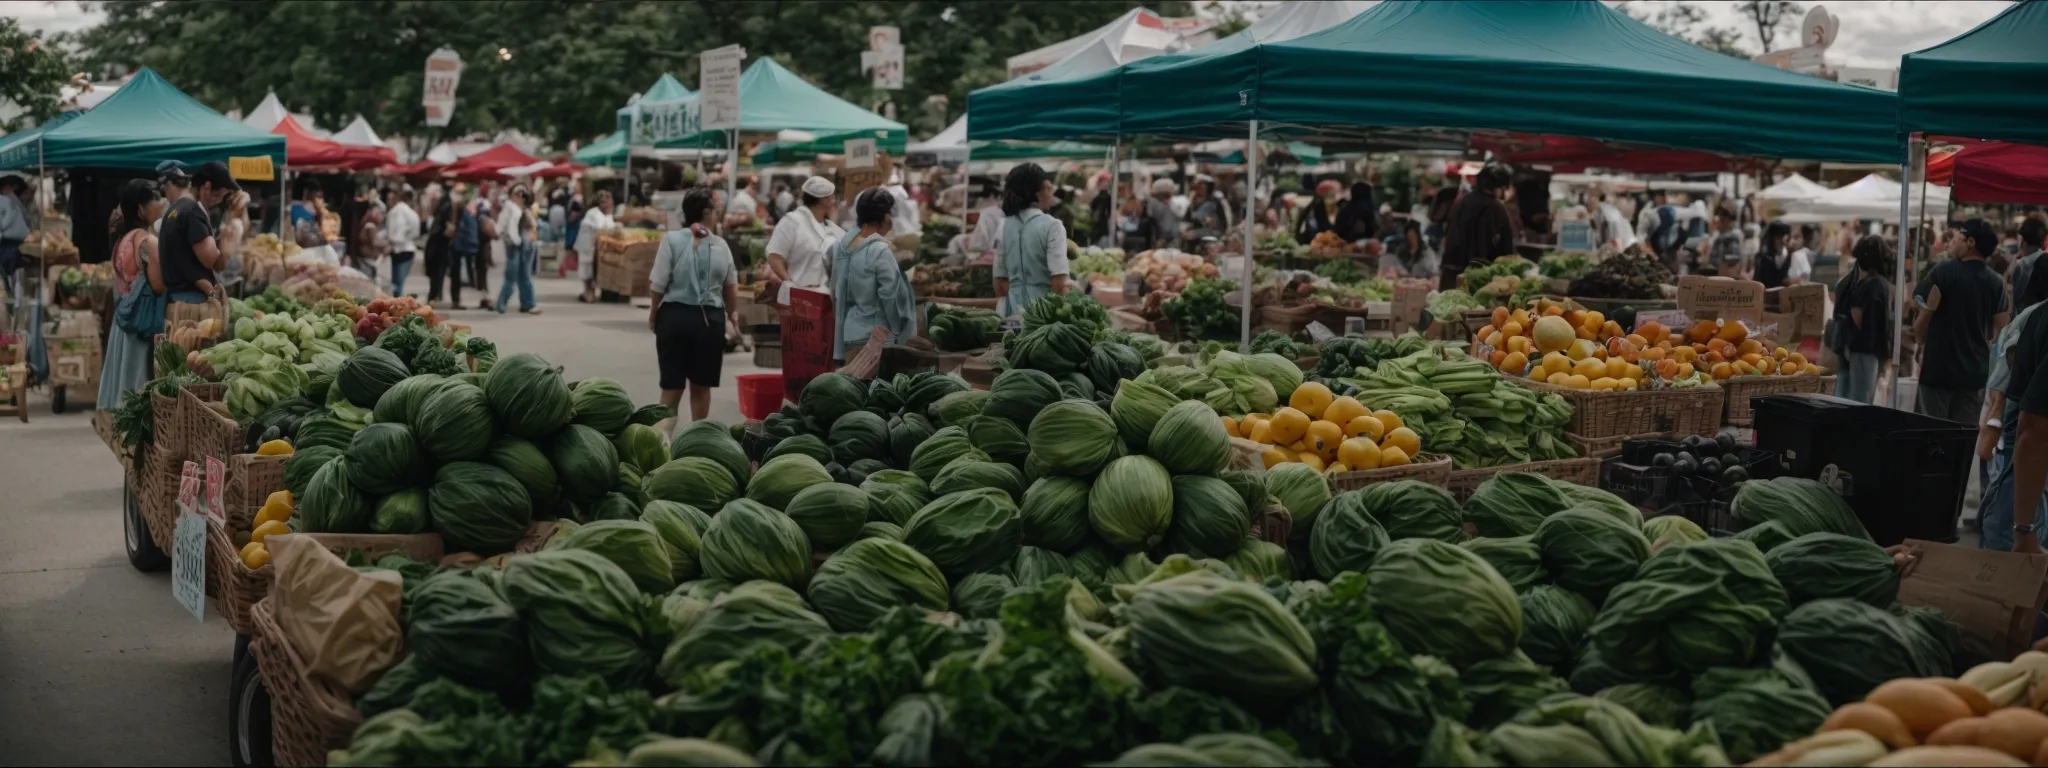 a bustling maryland farmer's market scene showcasing diverse local produce and community engagement.